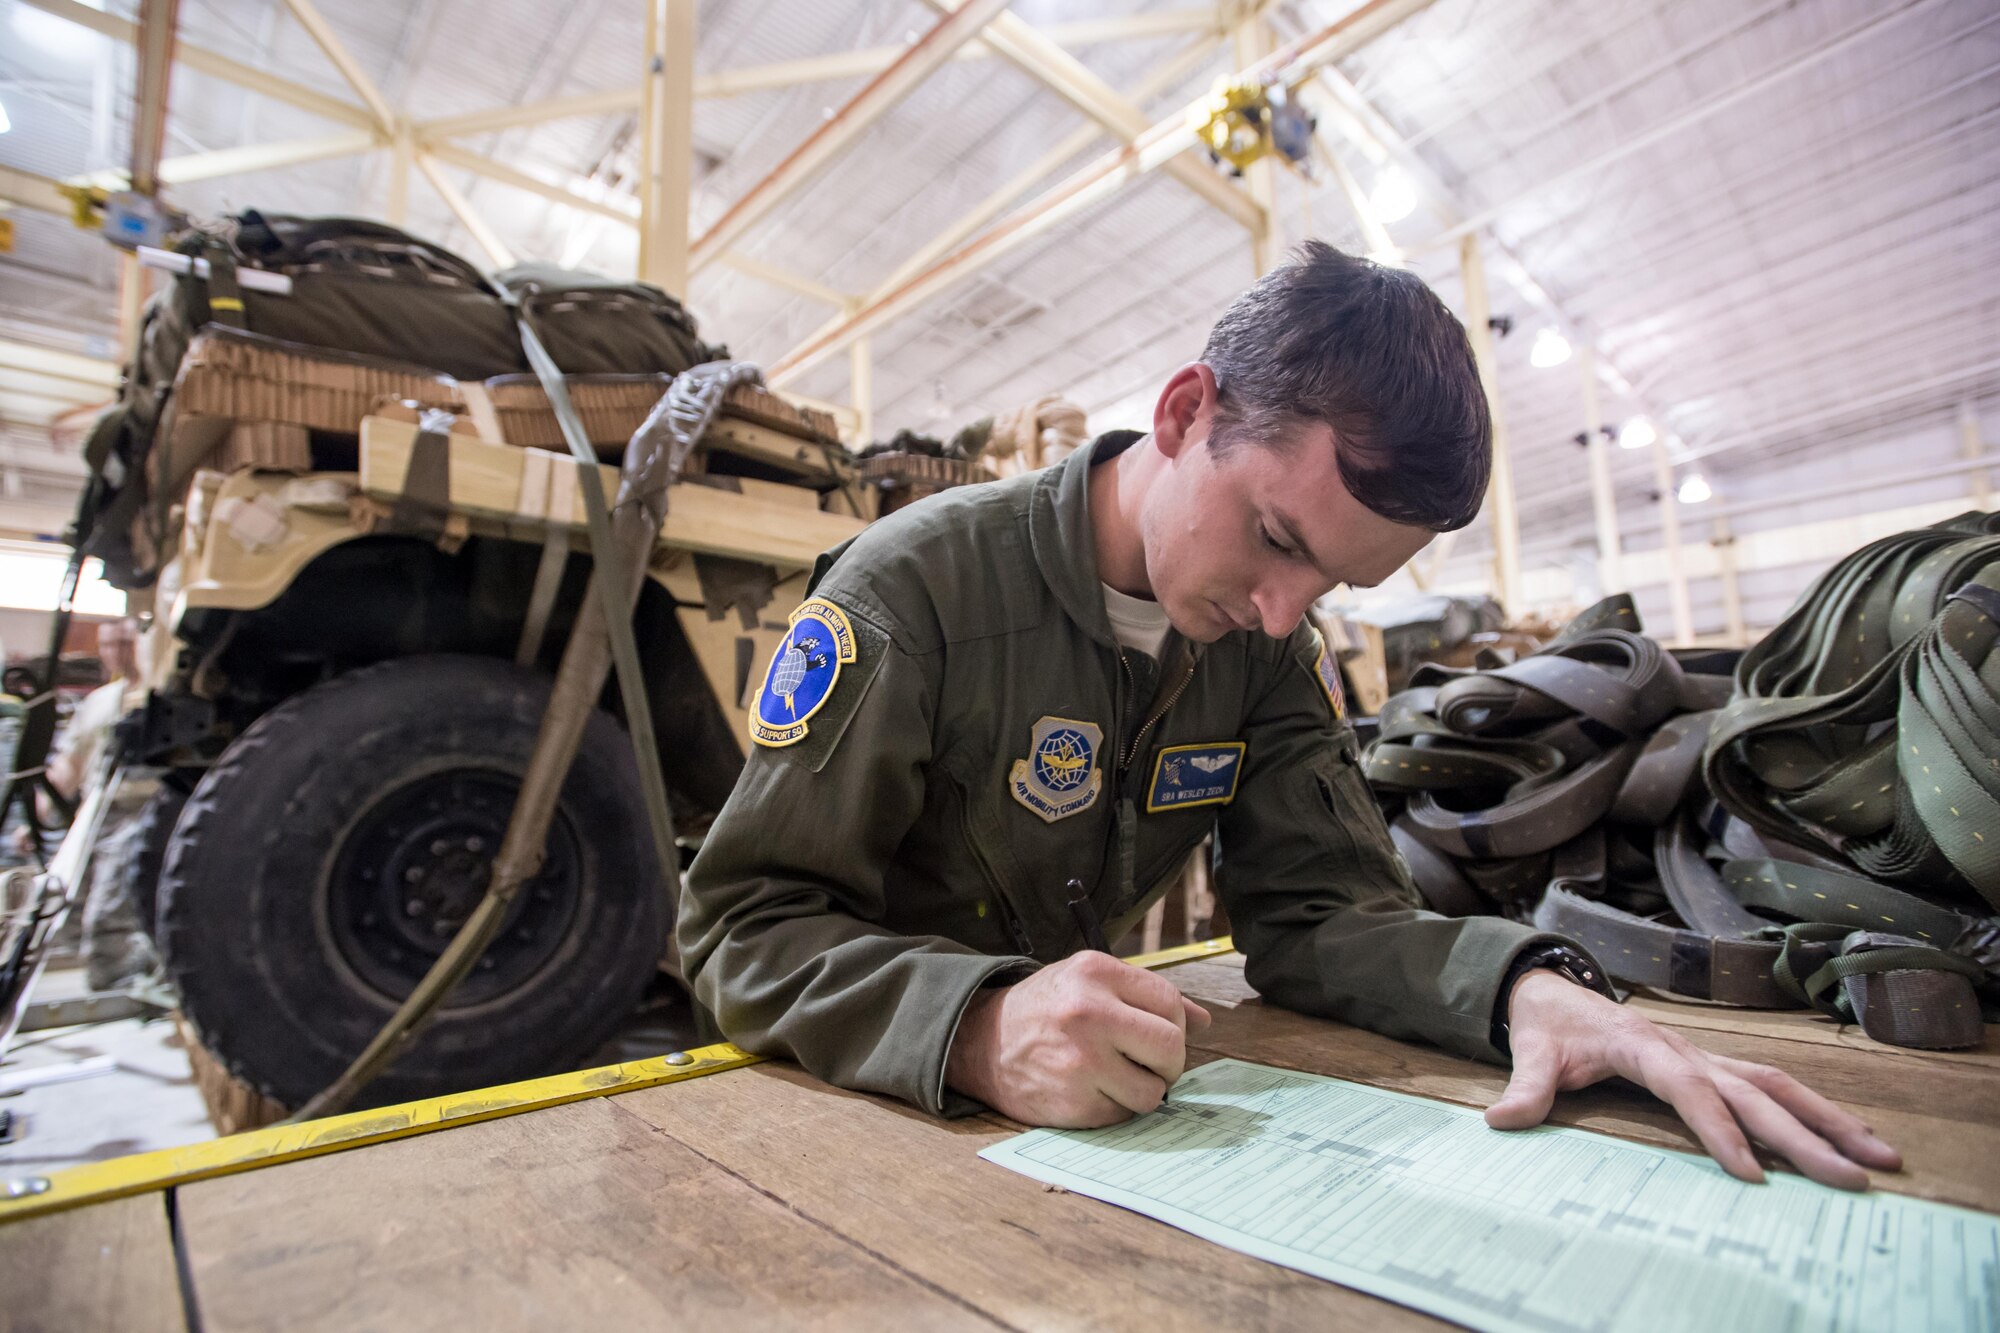 Senior Airman Wesley Zech, a 43d Operations Support Squadron joint airdrop inspector, completes paperwork to clear heavy equipment for airdrop after an inspection at the Army’s Heavy Drop Rigging Facility here April 26. Zech worked with fellow 43d OSS inspectors to ensure more than 200 tons of cargo were ready for airdrop from Air Force C-17s and C-130s flying out of Pope Field during a large package joint training exercise April 26-30. The 43d OSS is part of the Air Force’s 43d Air Mobility Operations Group, which provides 24/7 operational and training mission support for visiting Air Mobility Command aircraft and crews, for the 82nd Airborne Division and other Army units here, and for joint special forces units at Fort Bragg. (U.S. Air Force photo/Marc Barnes)